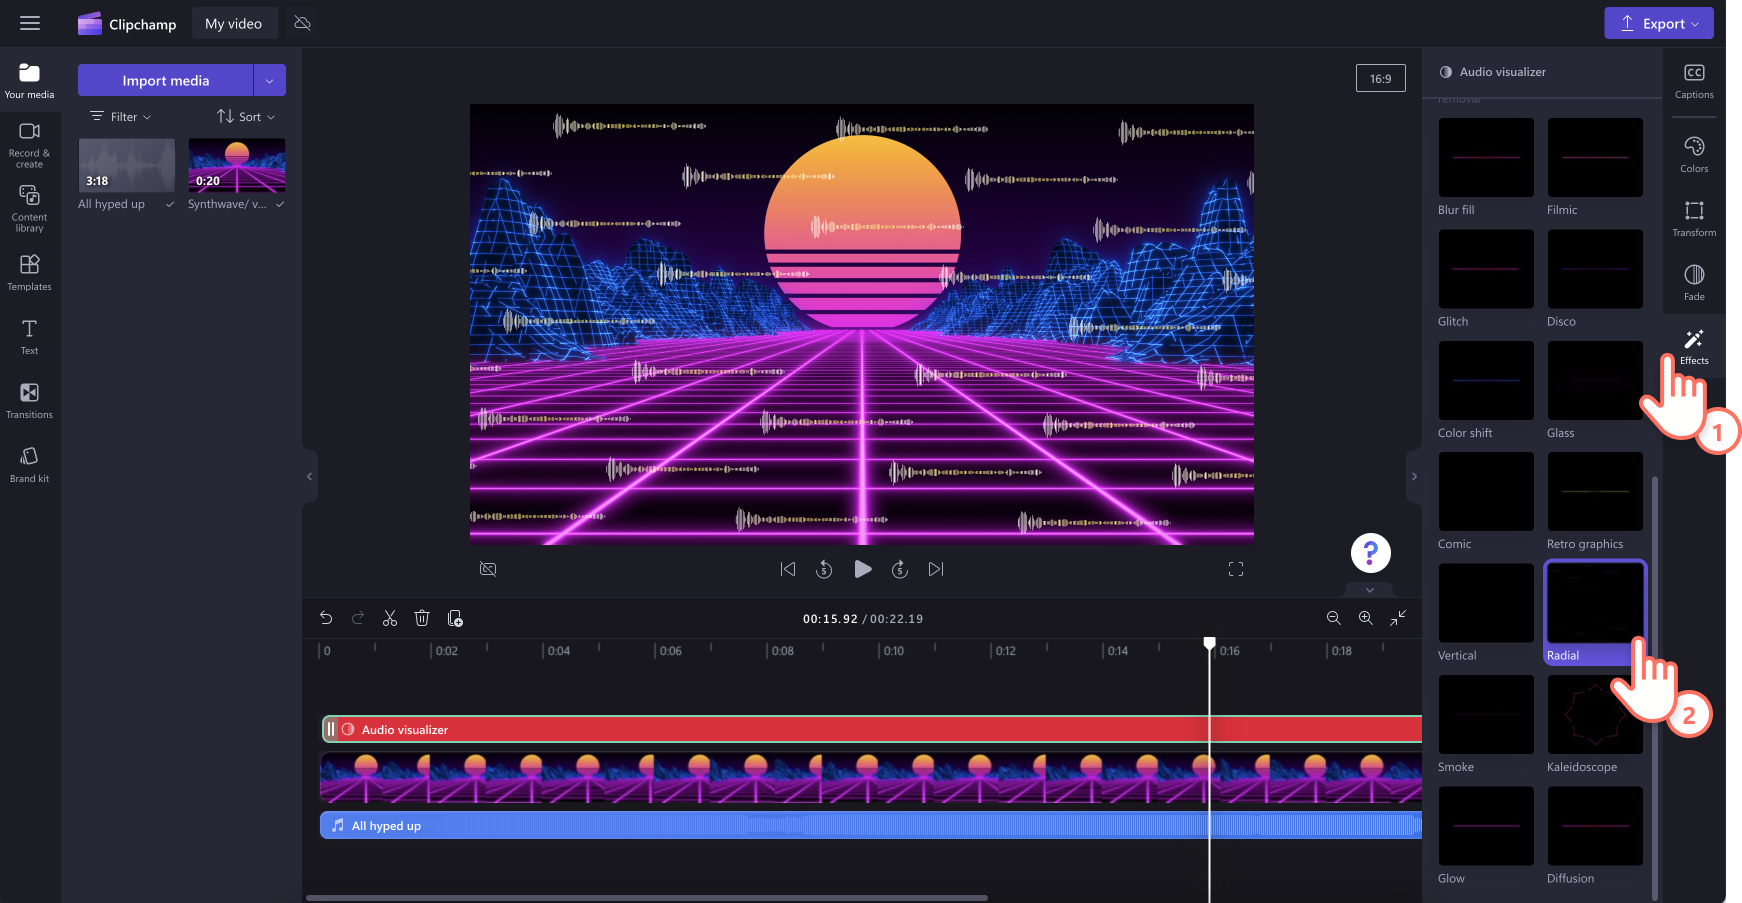 Adding video effects to audio visualizer